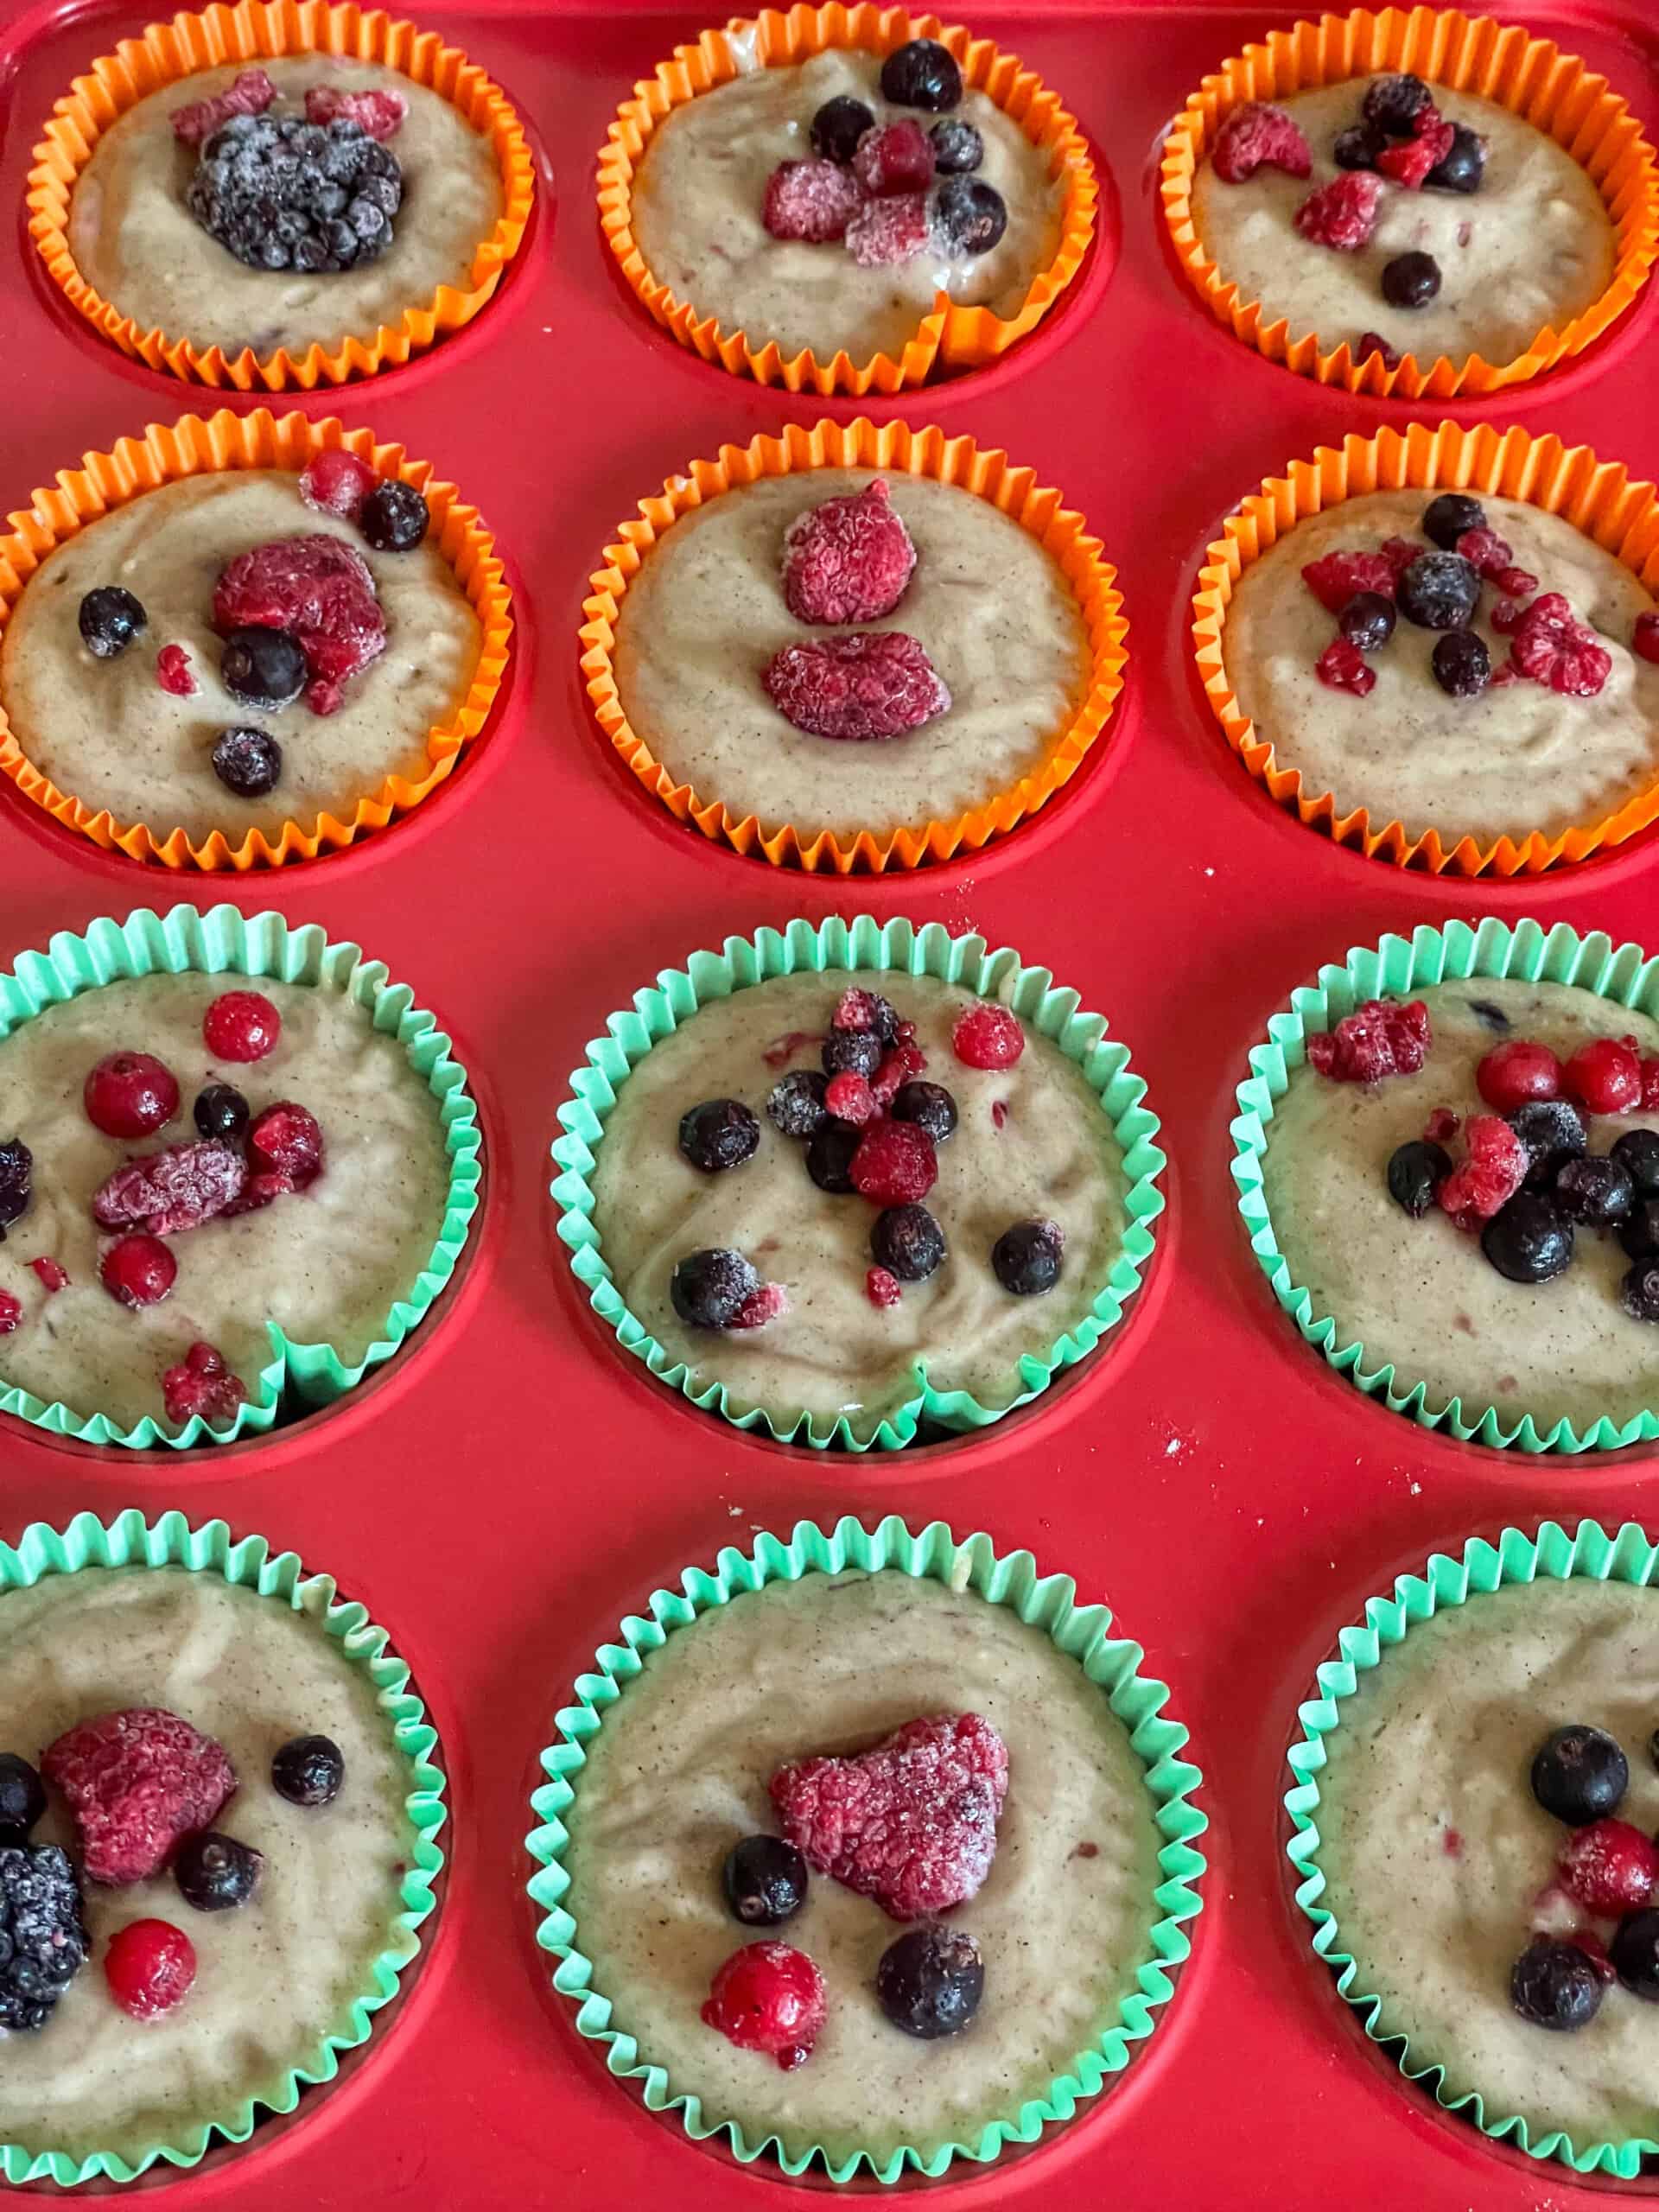 Extra mixed berries scattered over top of muffins.